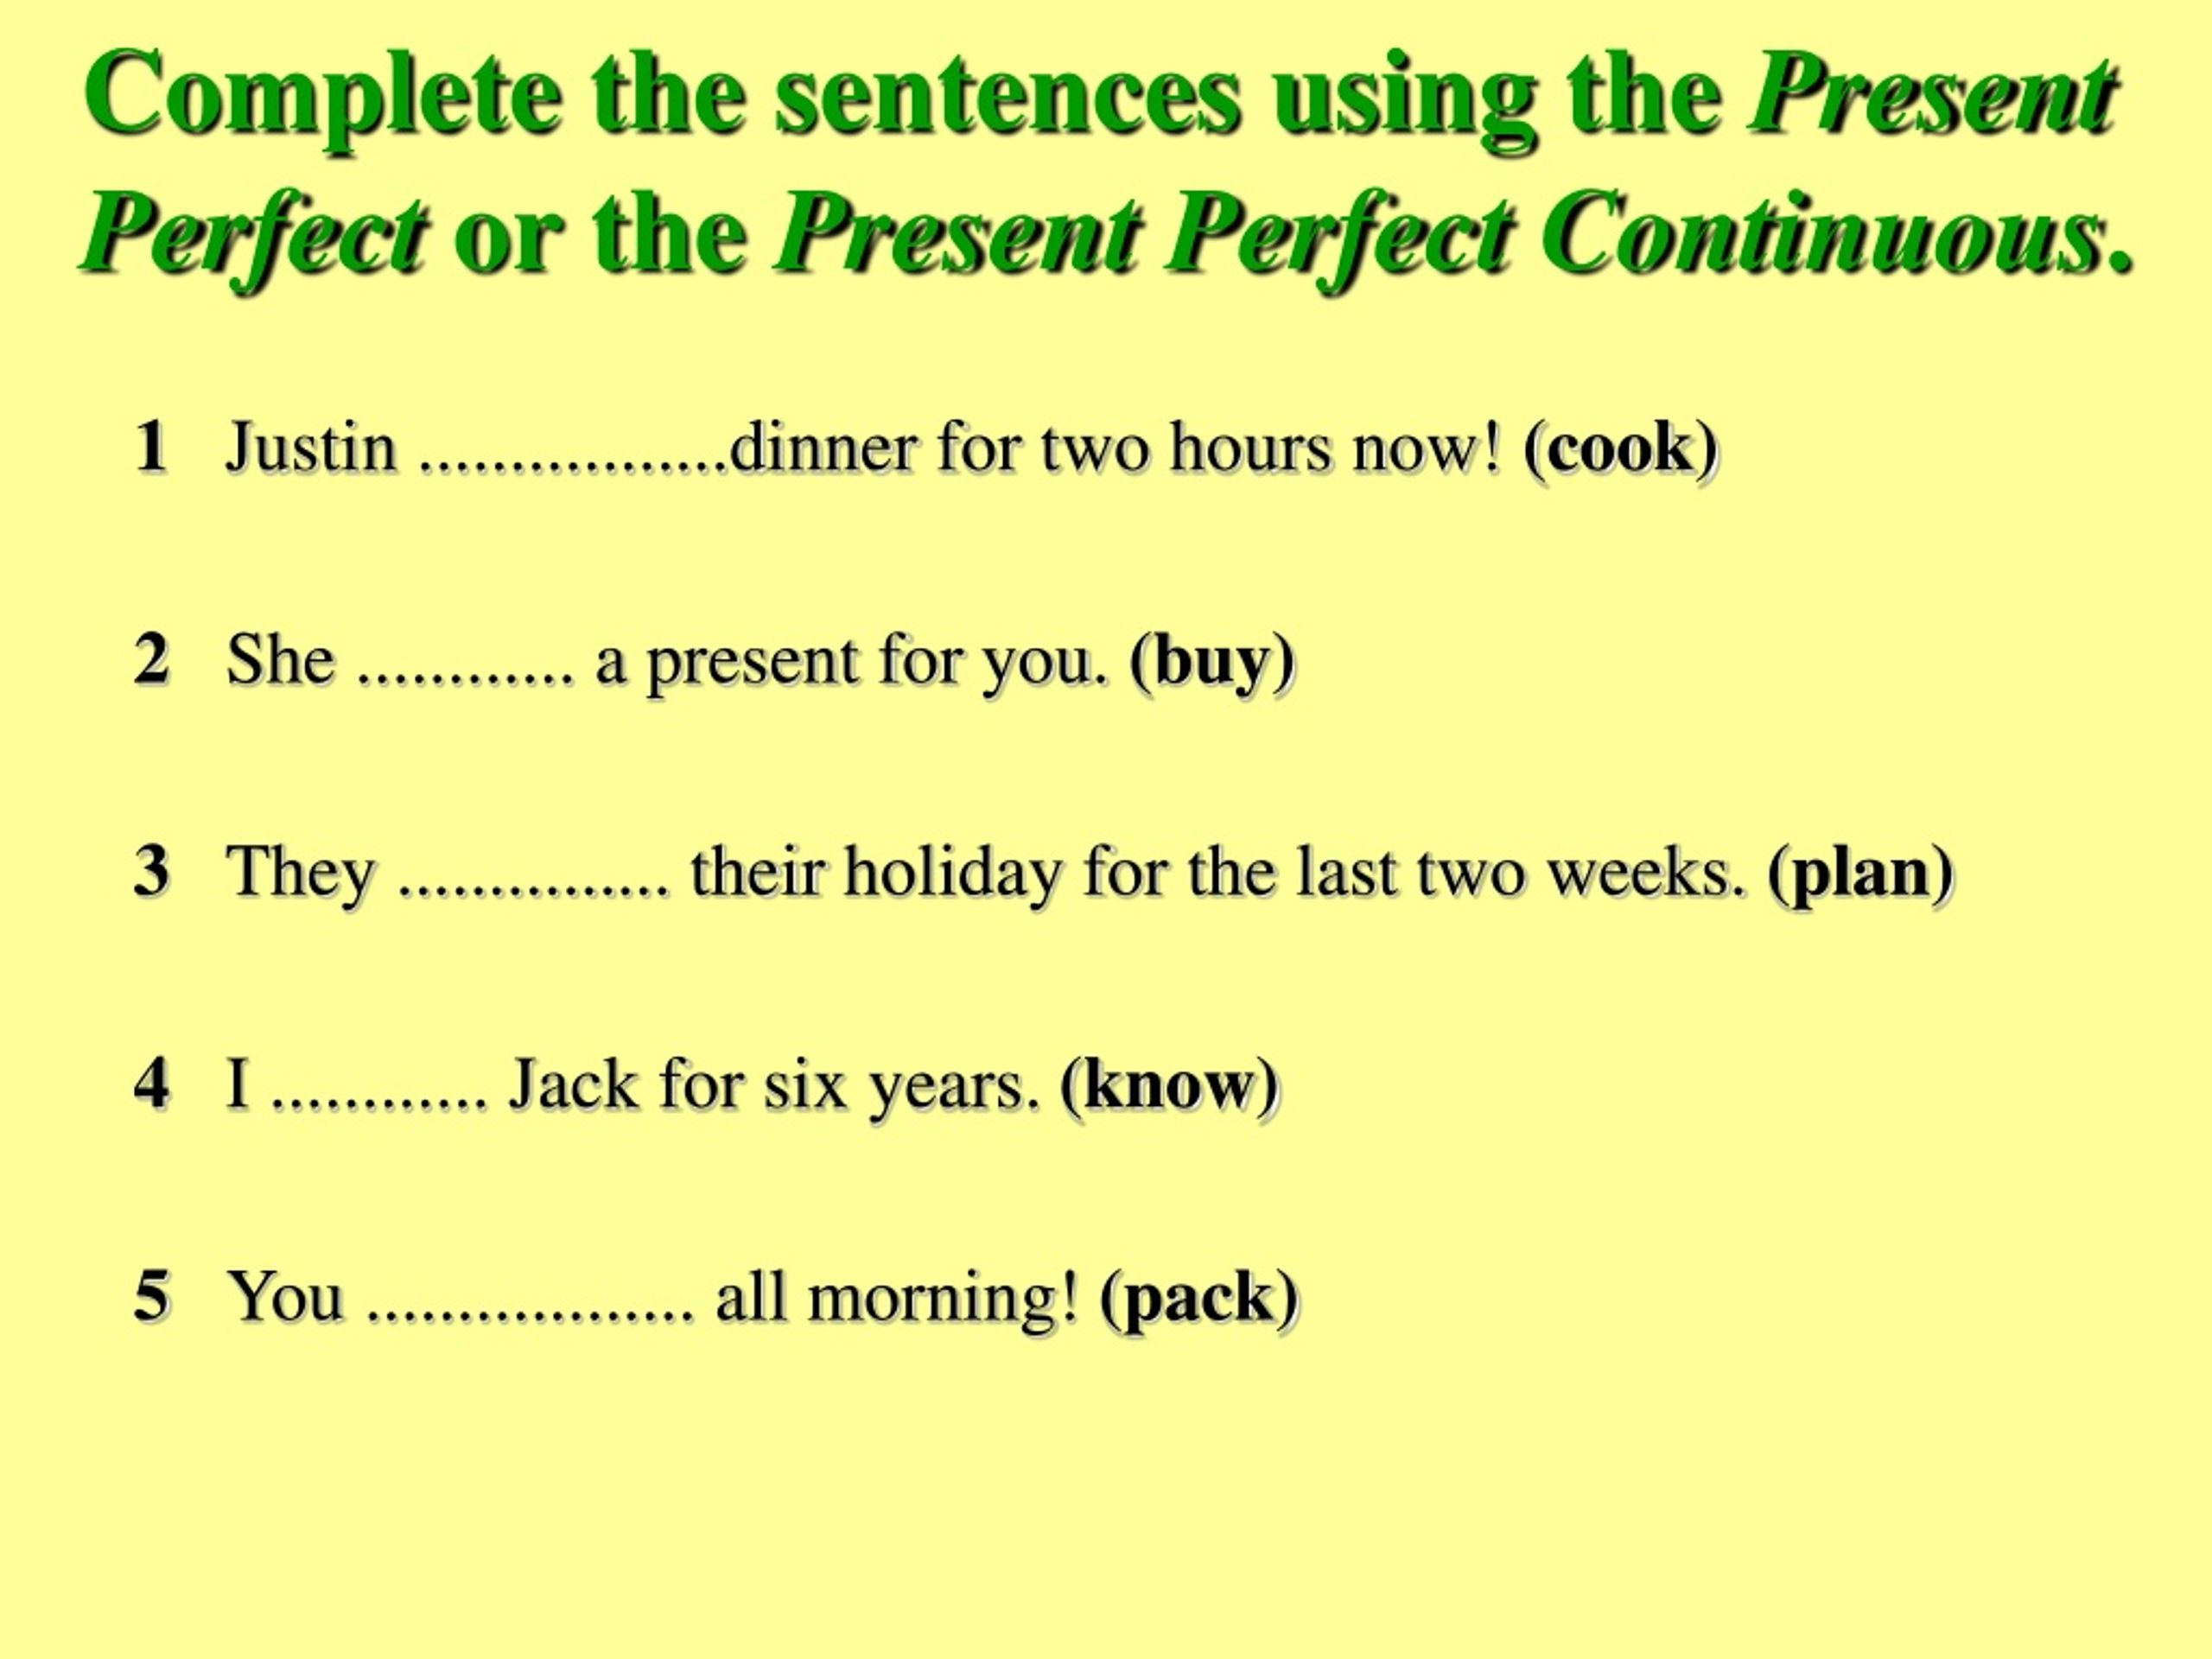 Complete the questions use the present. Present perfect simple и present perfect Continuous разница. Past simple vs present perfect vs present perfect Continuous. Упр на present perfect и present perfect Continuous. Present perfect or present perfect Continuous упражнения.